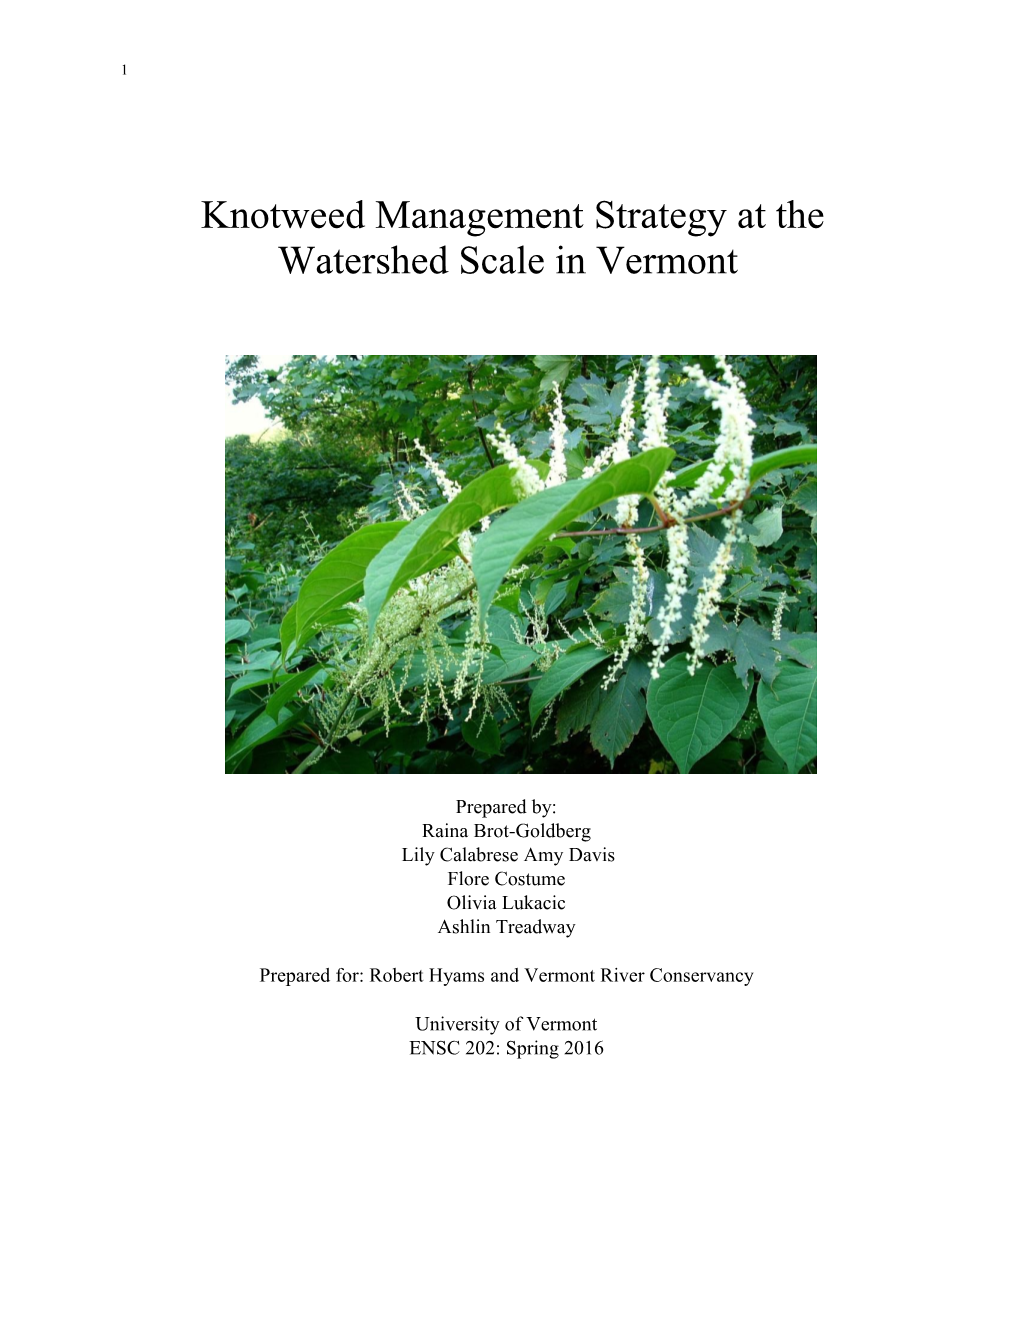 Knotweed Management Strategy at the Watershed Scale in Vermont